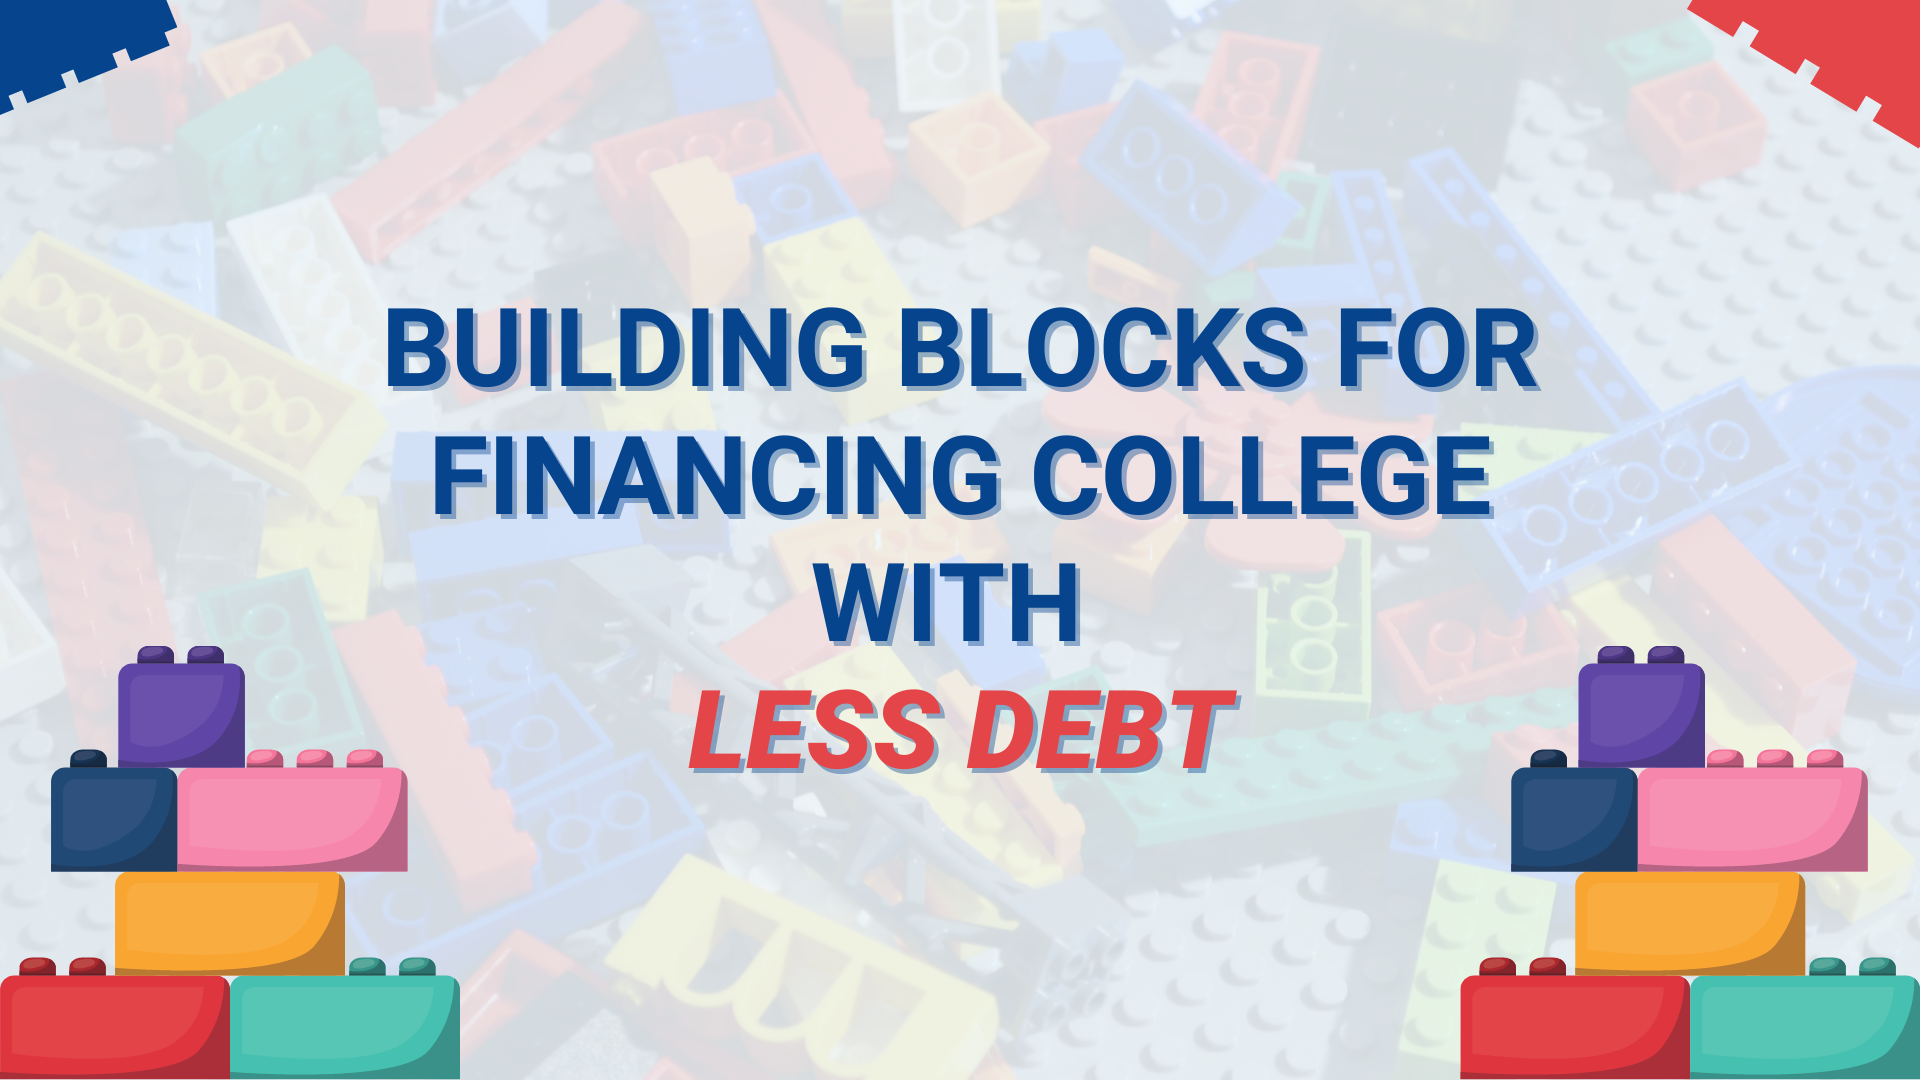 Building Blocks for Financing College with Less Debt